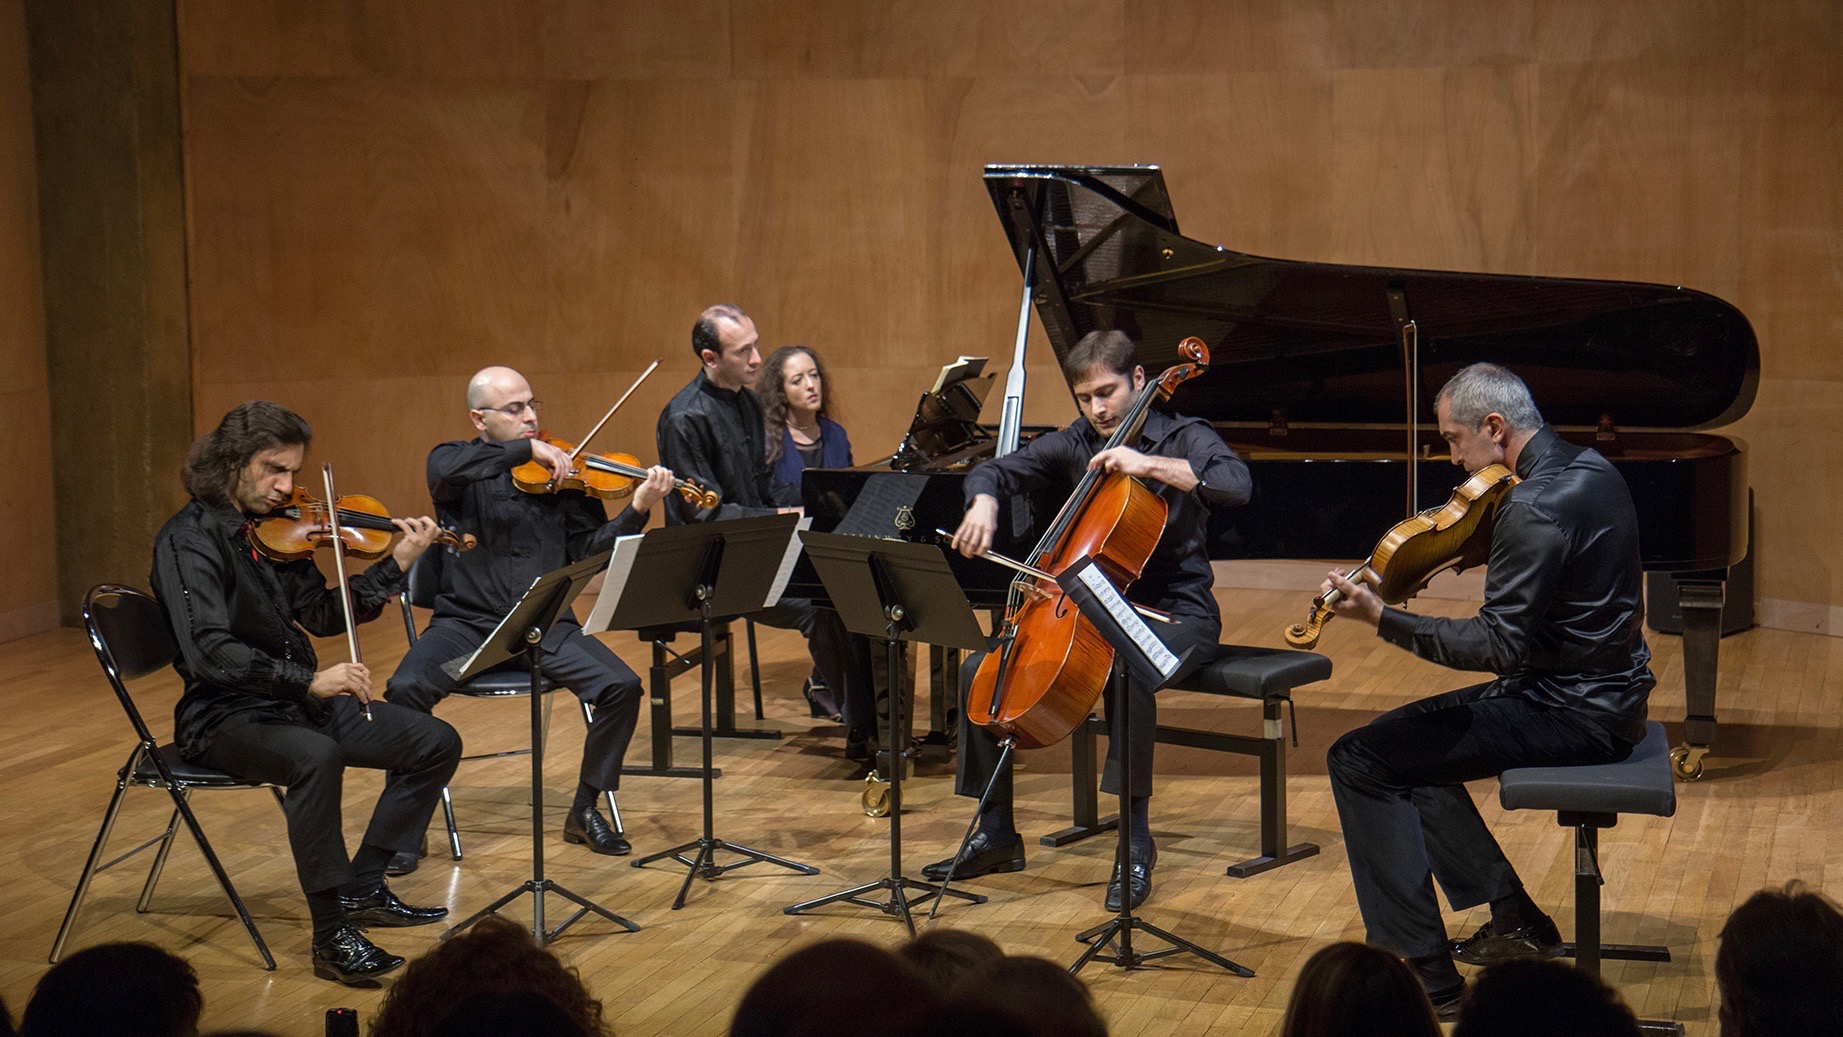 AGBU France Performing Arts Department Holds Concert at Renowned Salle Cortot in Paris, France – October 15, 2016